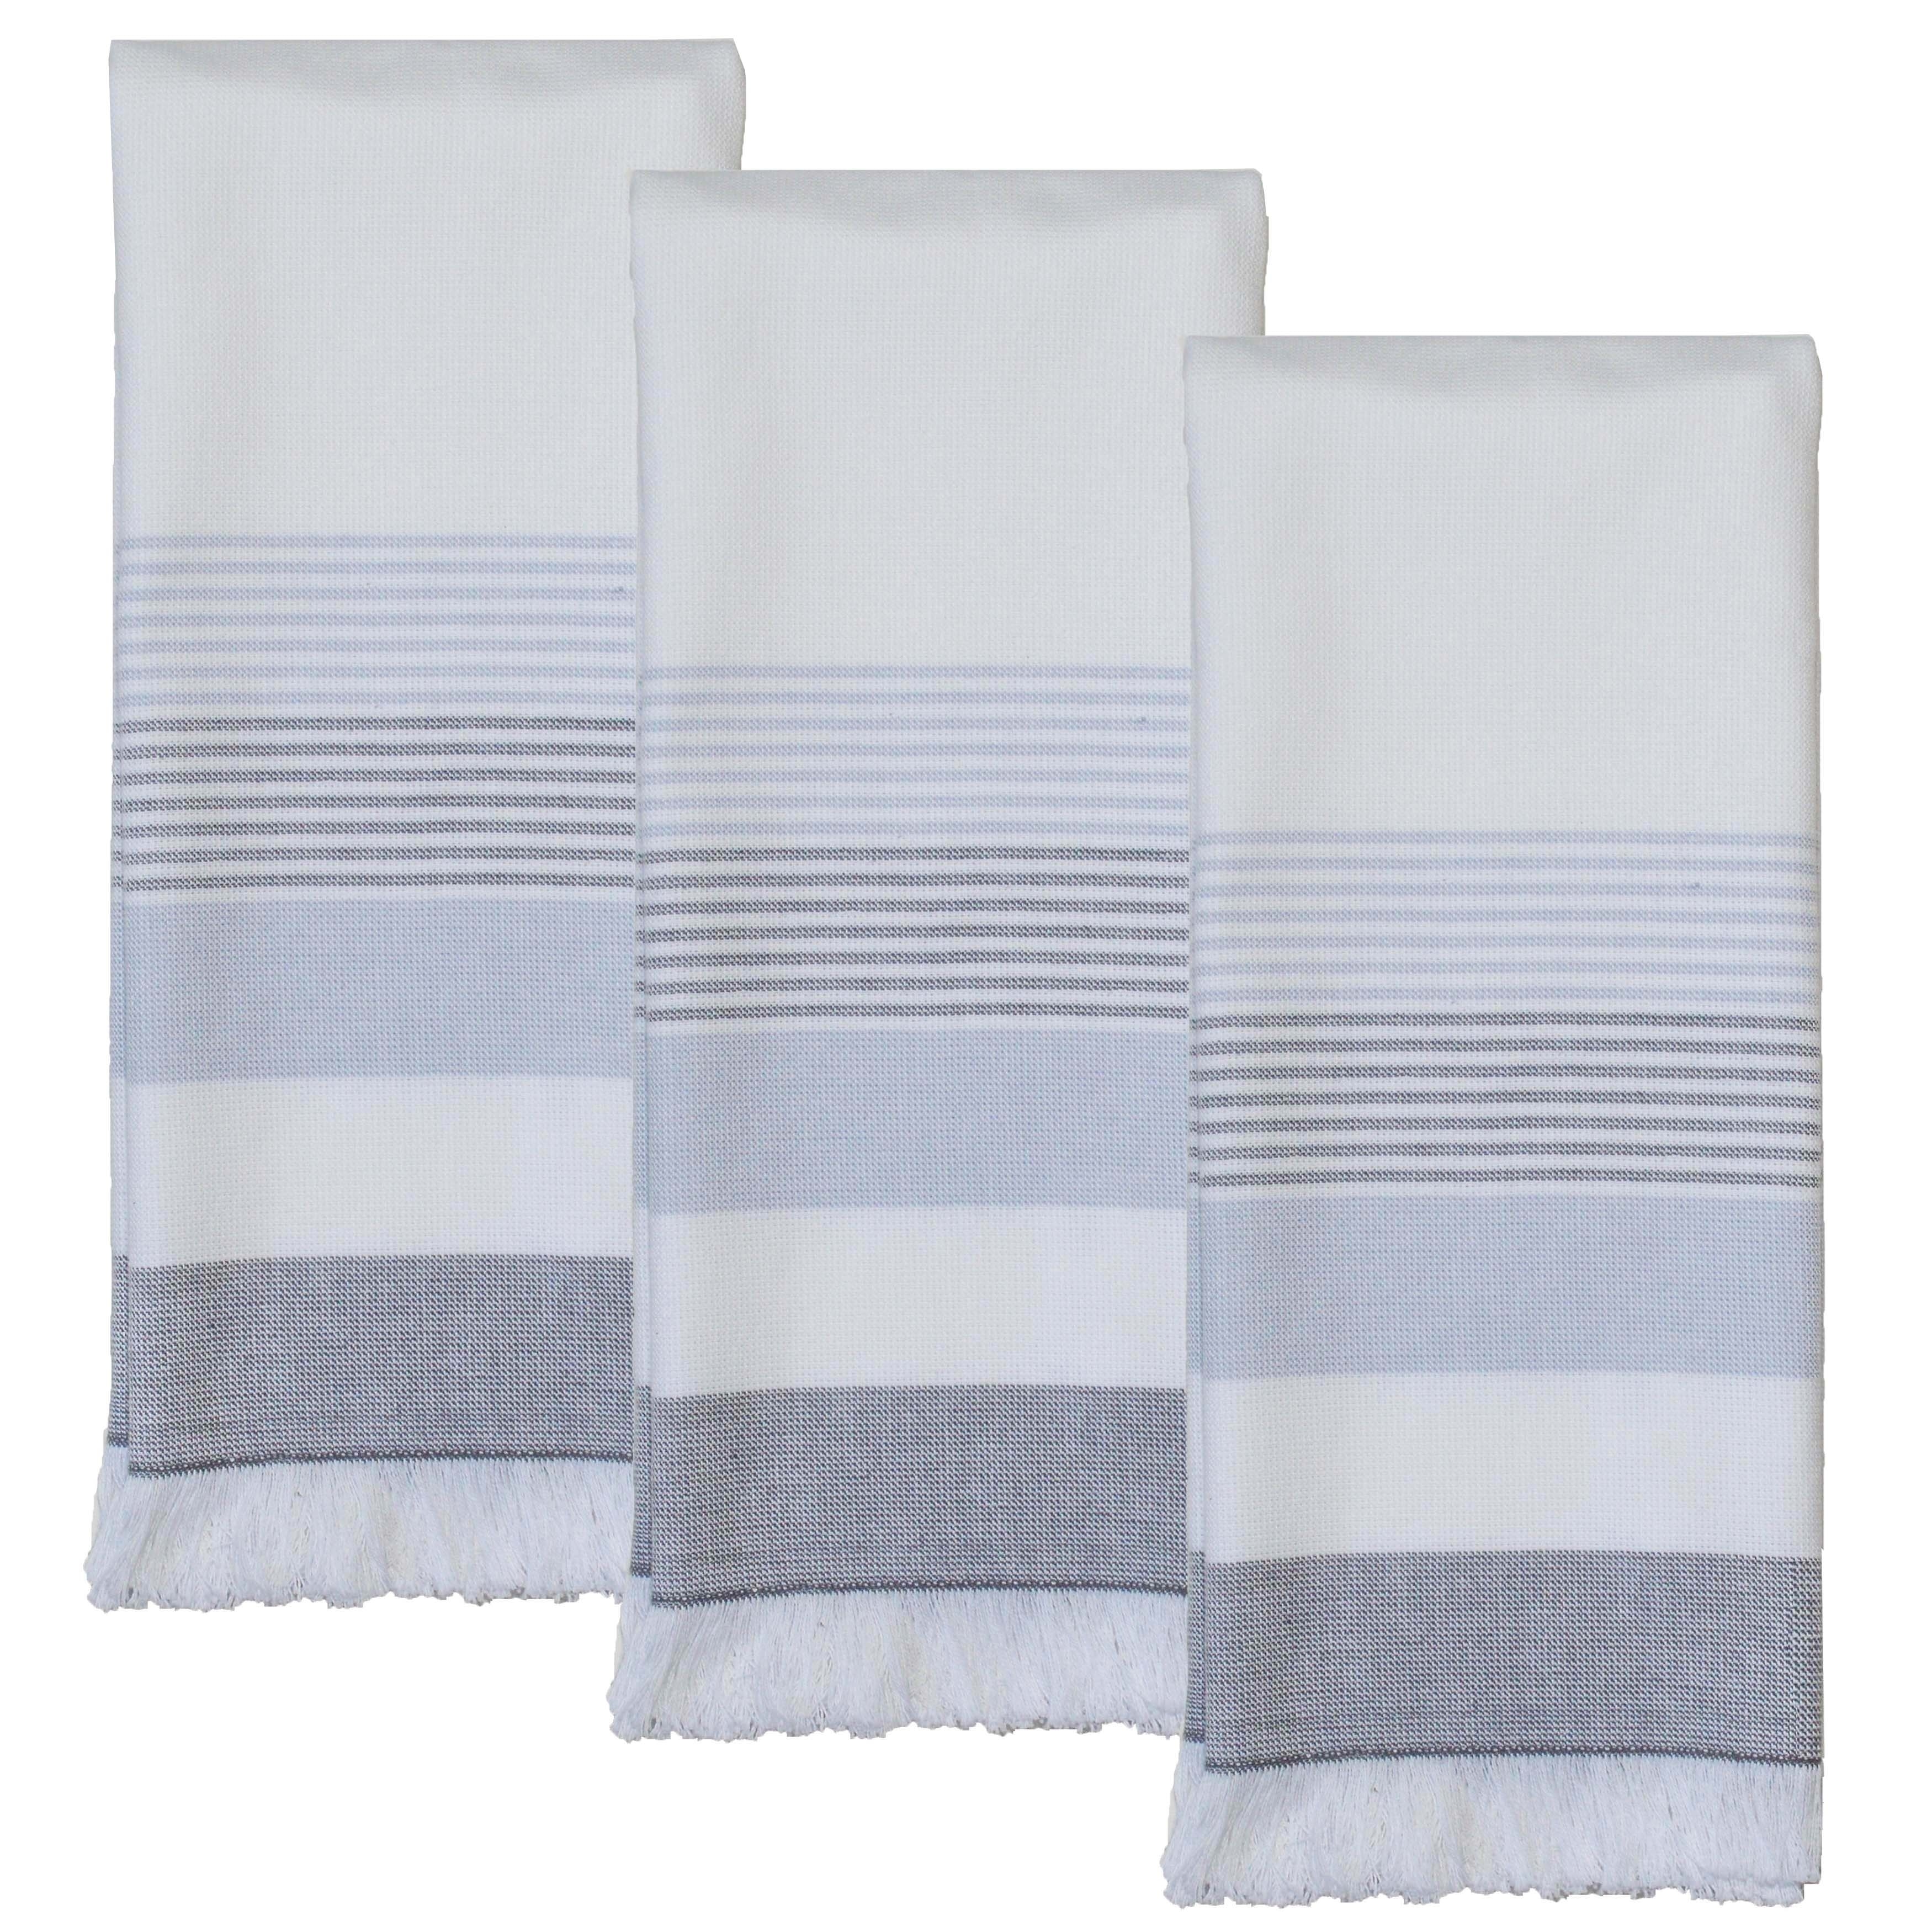 Details about   SET OF 3 SAME PRINTED TERRY KITCHEN COTTON TOWELS,16"x26" FRESH COFFEE THEME,AM 